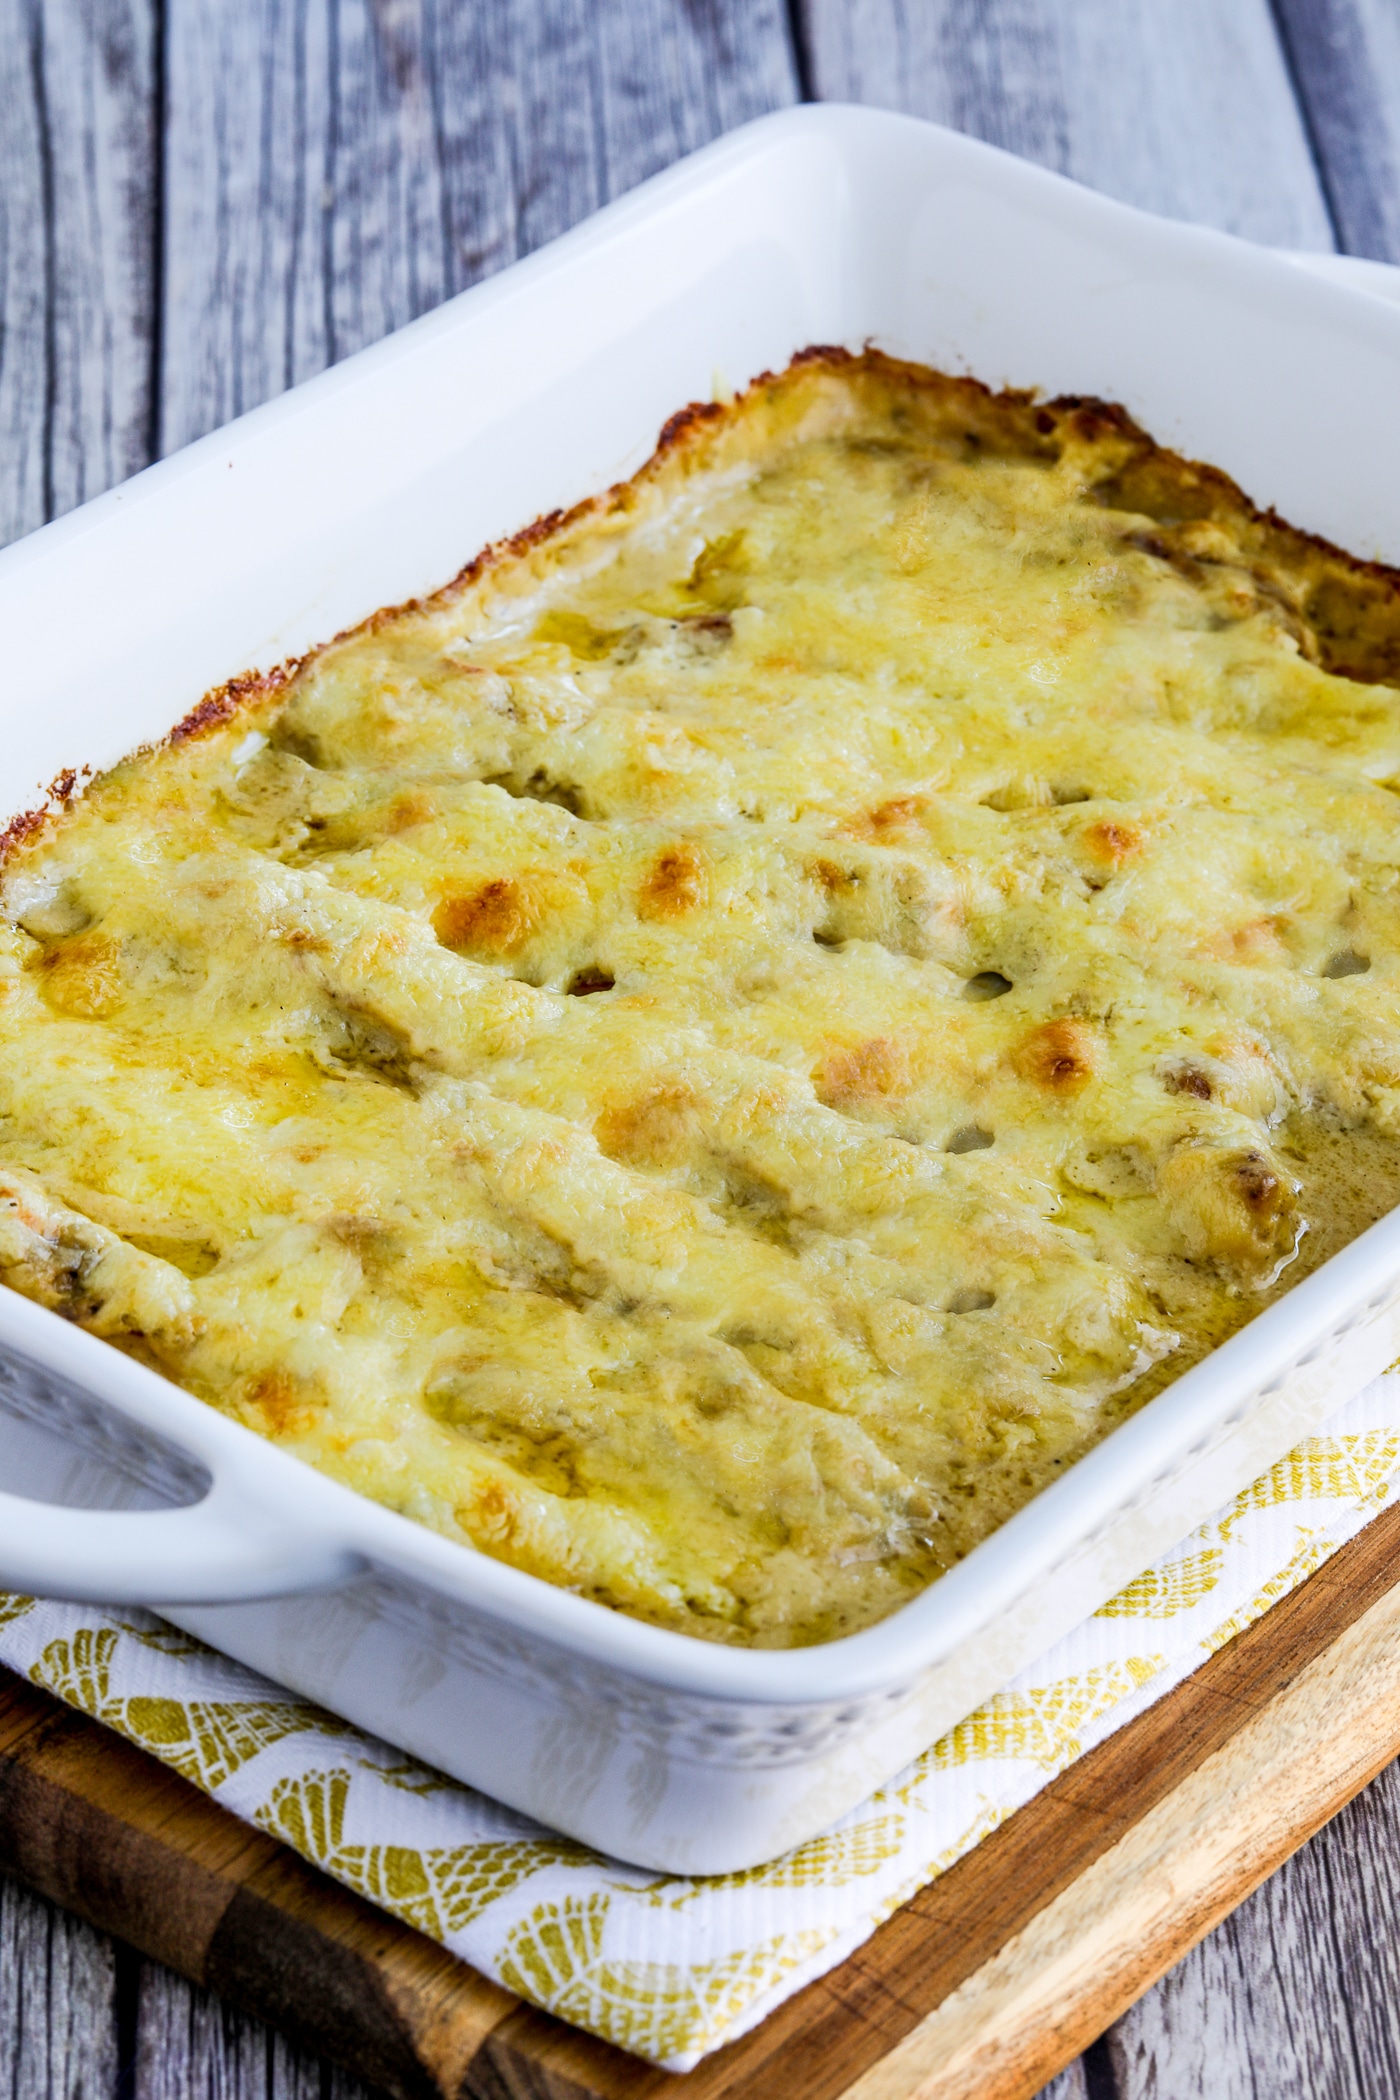 If you're not against using a convenience product like canned soup, this Sour Cream Chicken Bake is delicious and easy to make! finished casserole in baking dish